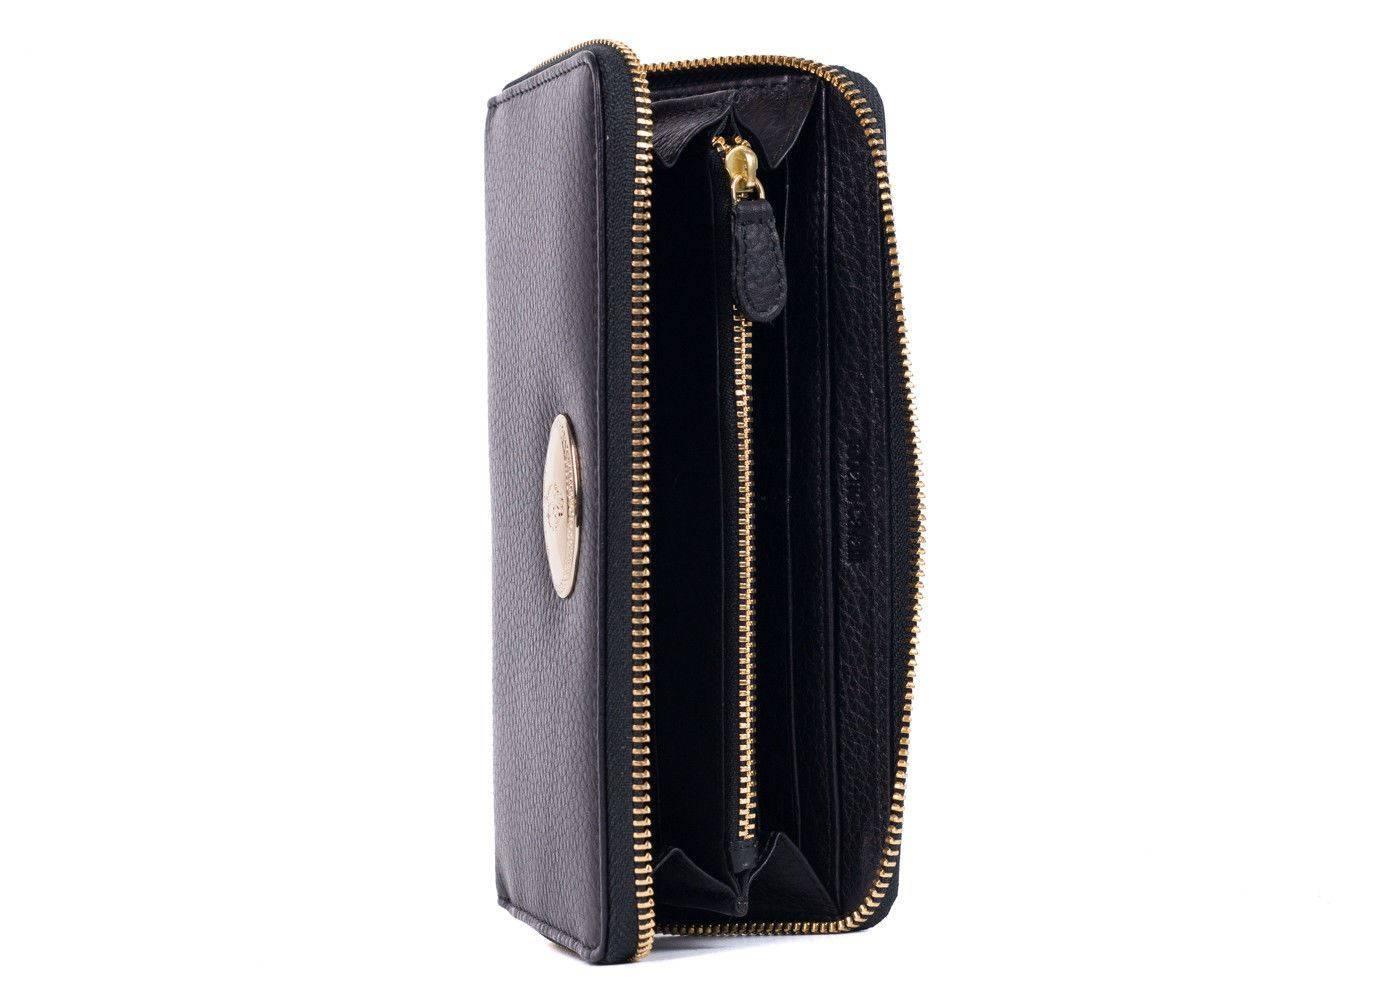 Brand New Roberto Cavalli Continental Wallet
Original Tags
Retails in Stores & Online for $495

Store your essentials away in style with your Roberto Cavalli Wallet. This continental beauty features twelve card slots, a conventional coin slot, and